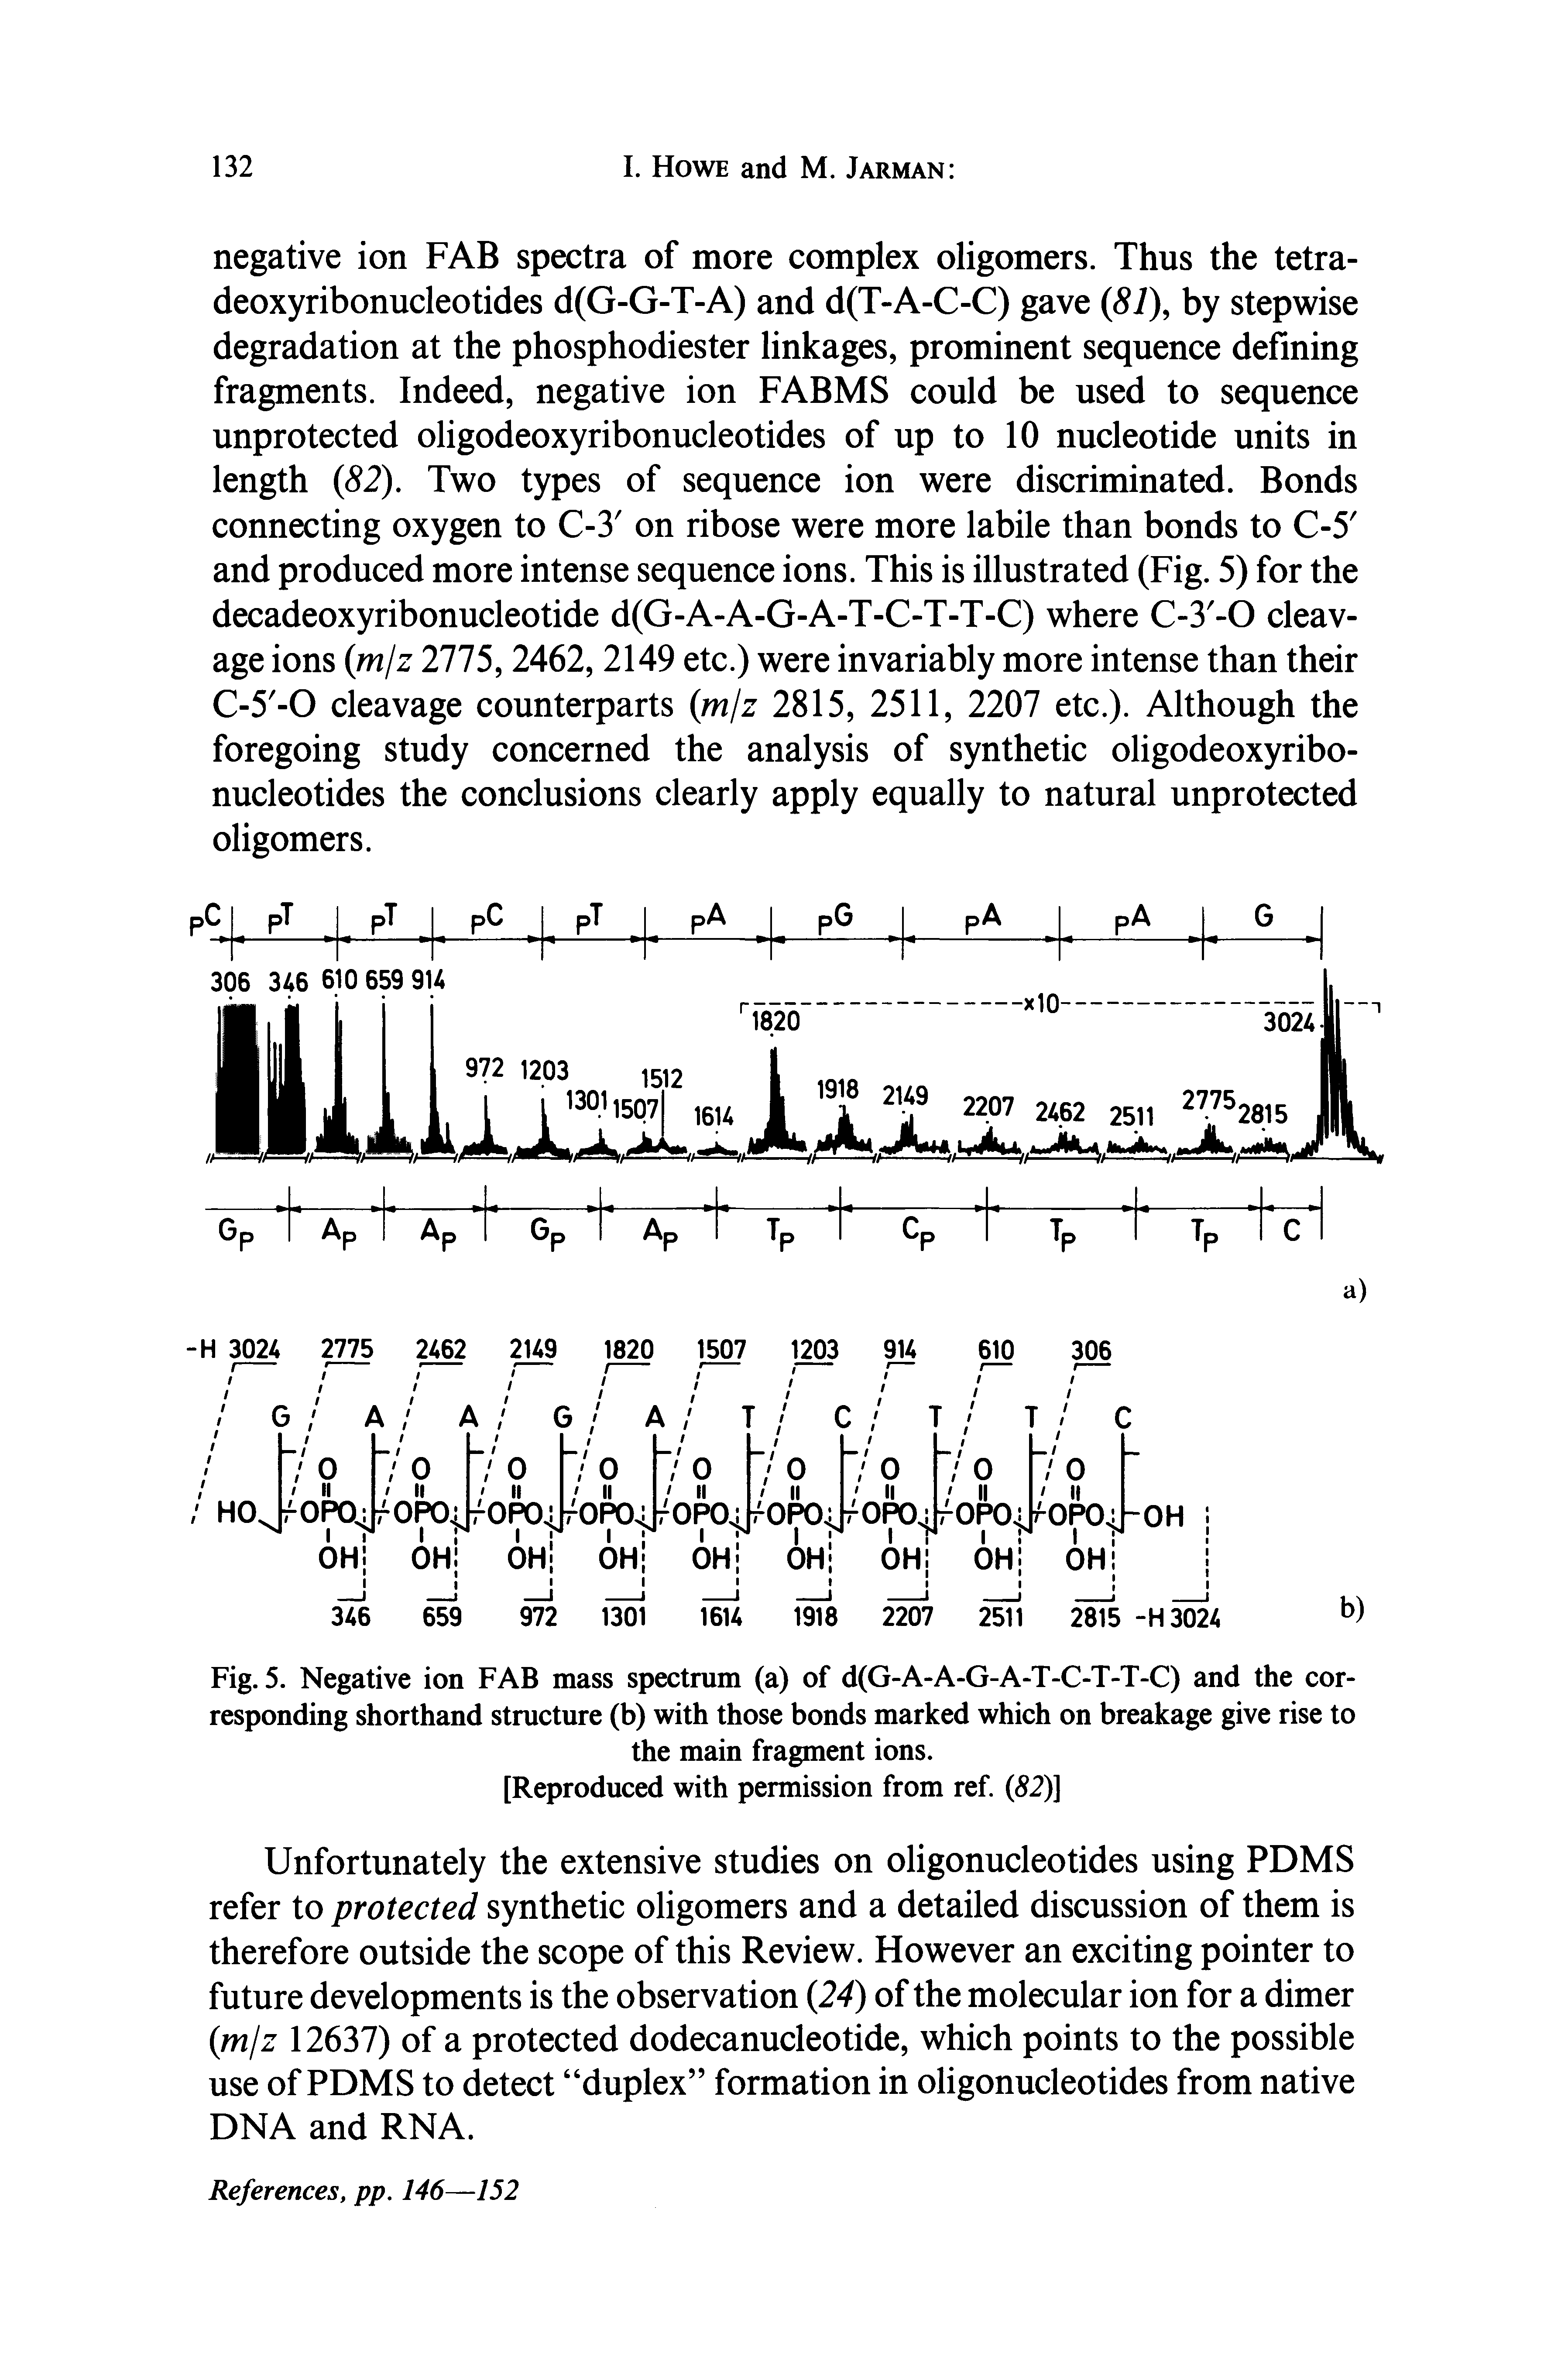 Fig. 5. Negative ion FAB mass spectrum (a) of d(G-A-A-G-A-T-C-T-T-C) and the corresponding shorthand structure (b) with those bonds marked which on breakage give rise to...